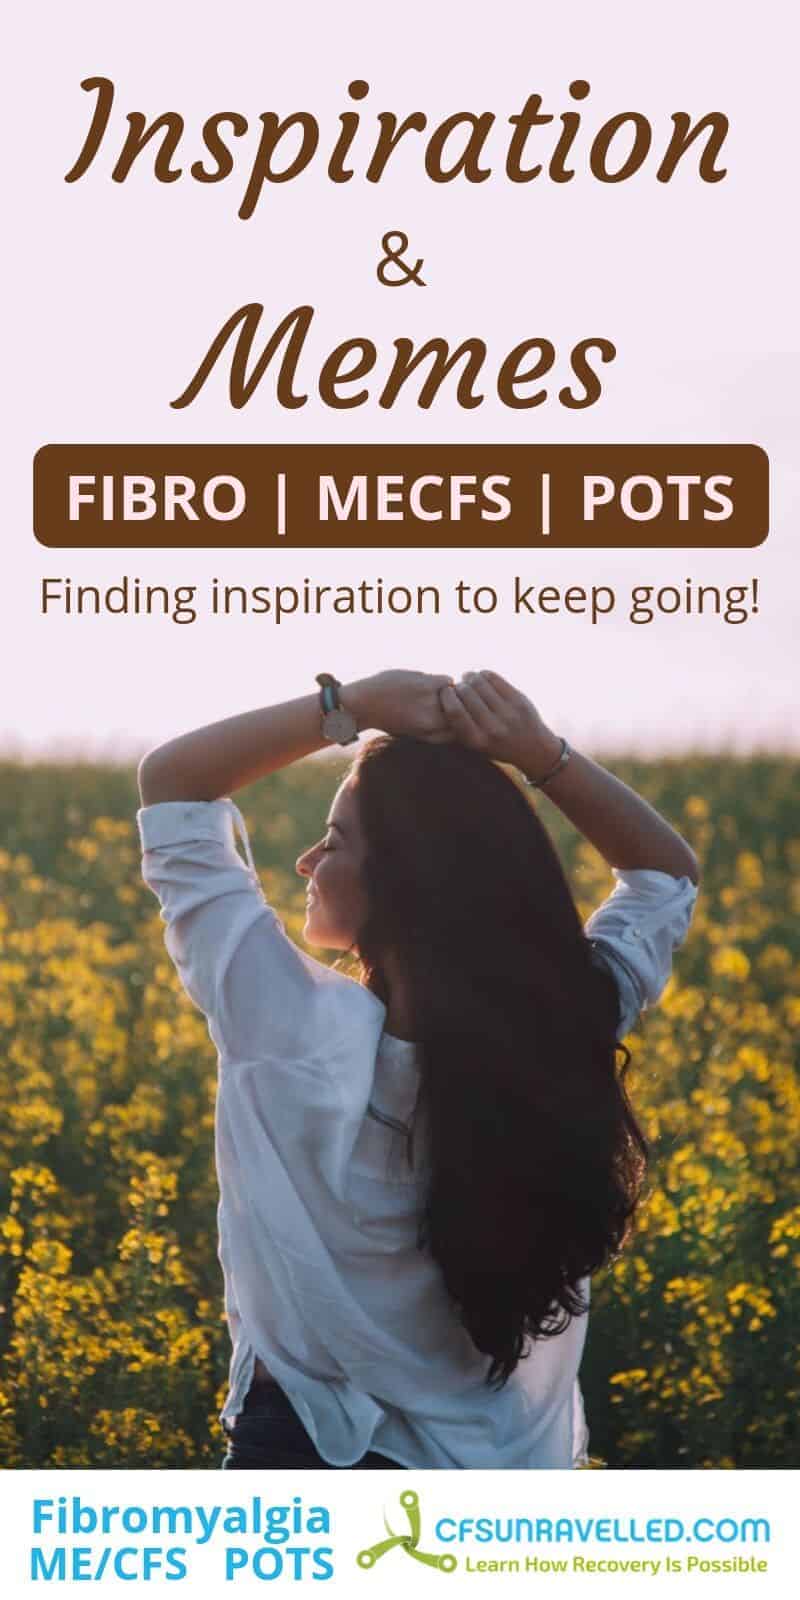 woman looking into field with headline about inspiration & memes for fibro mecfs pots